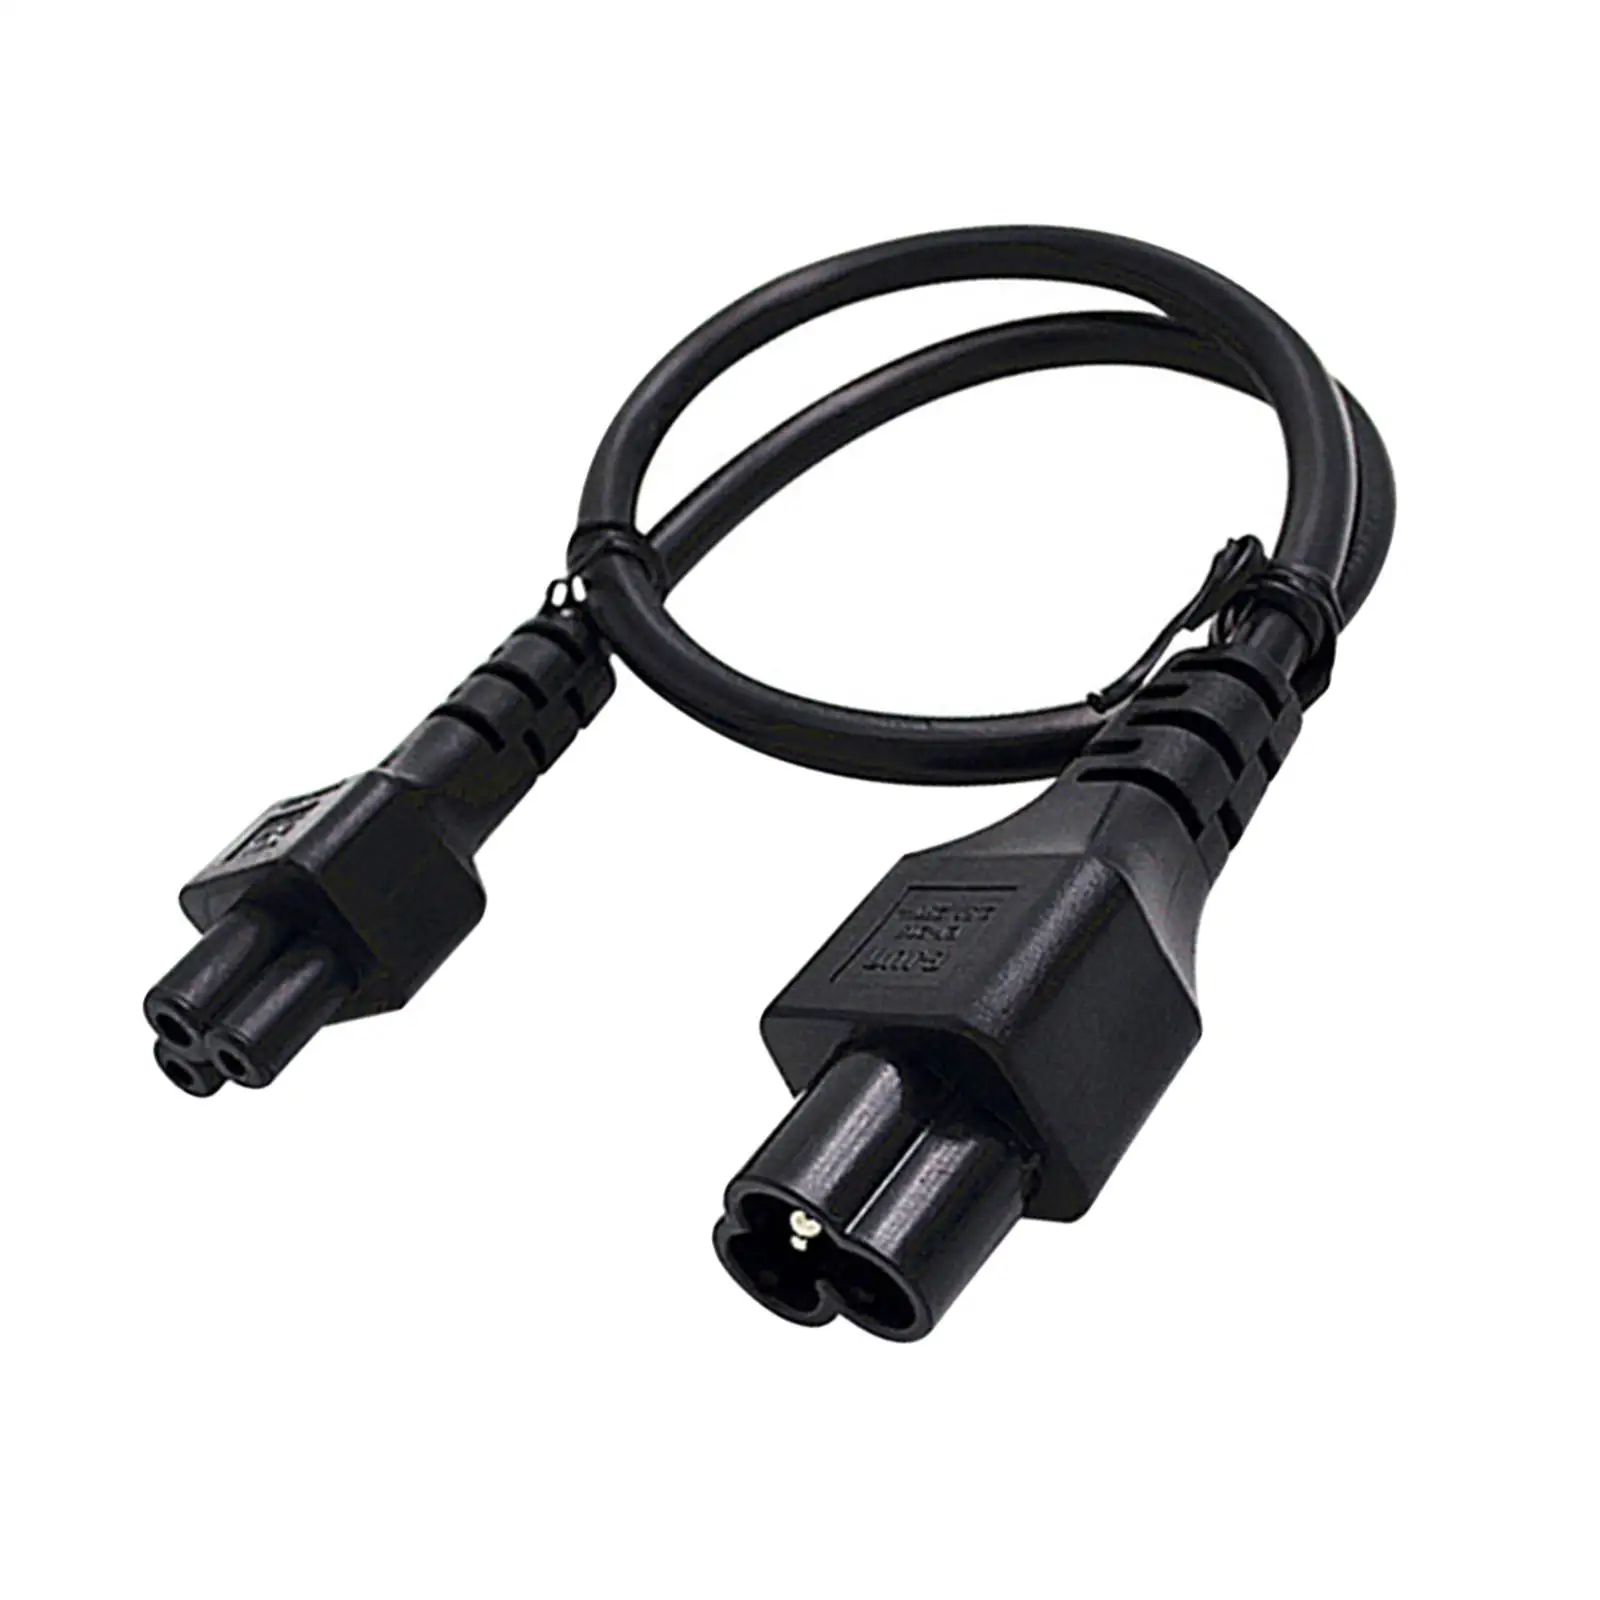 C6 to C5 PC Power Cord Cable Good Conductivity for Notebook Scanner Computer Laptop